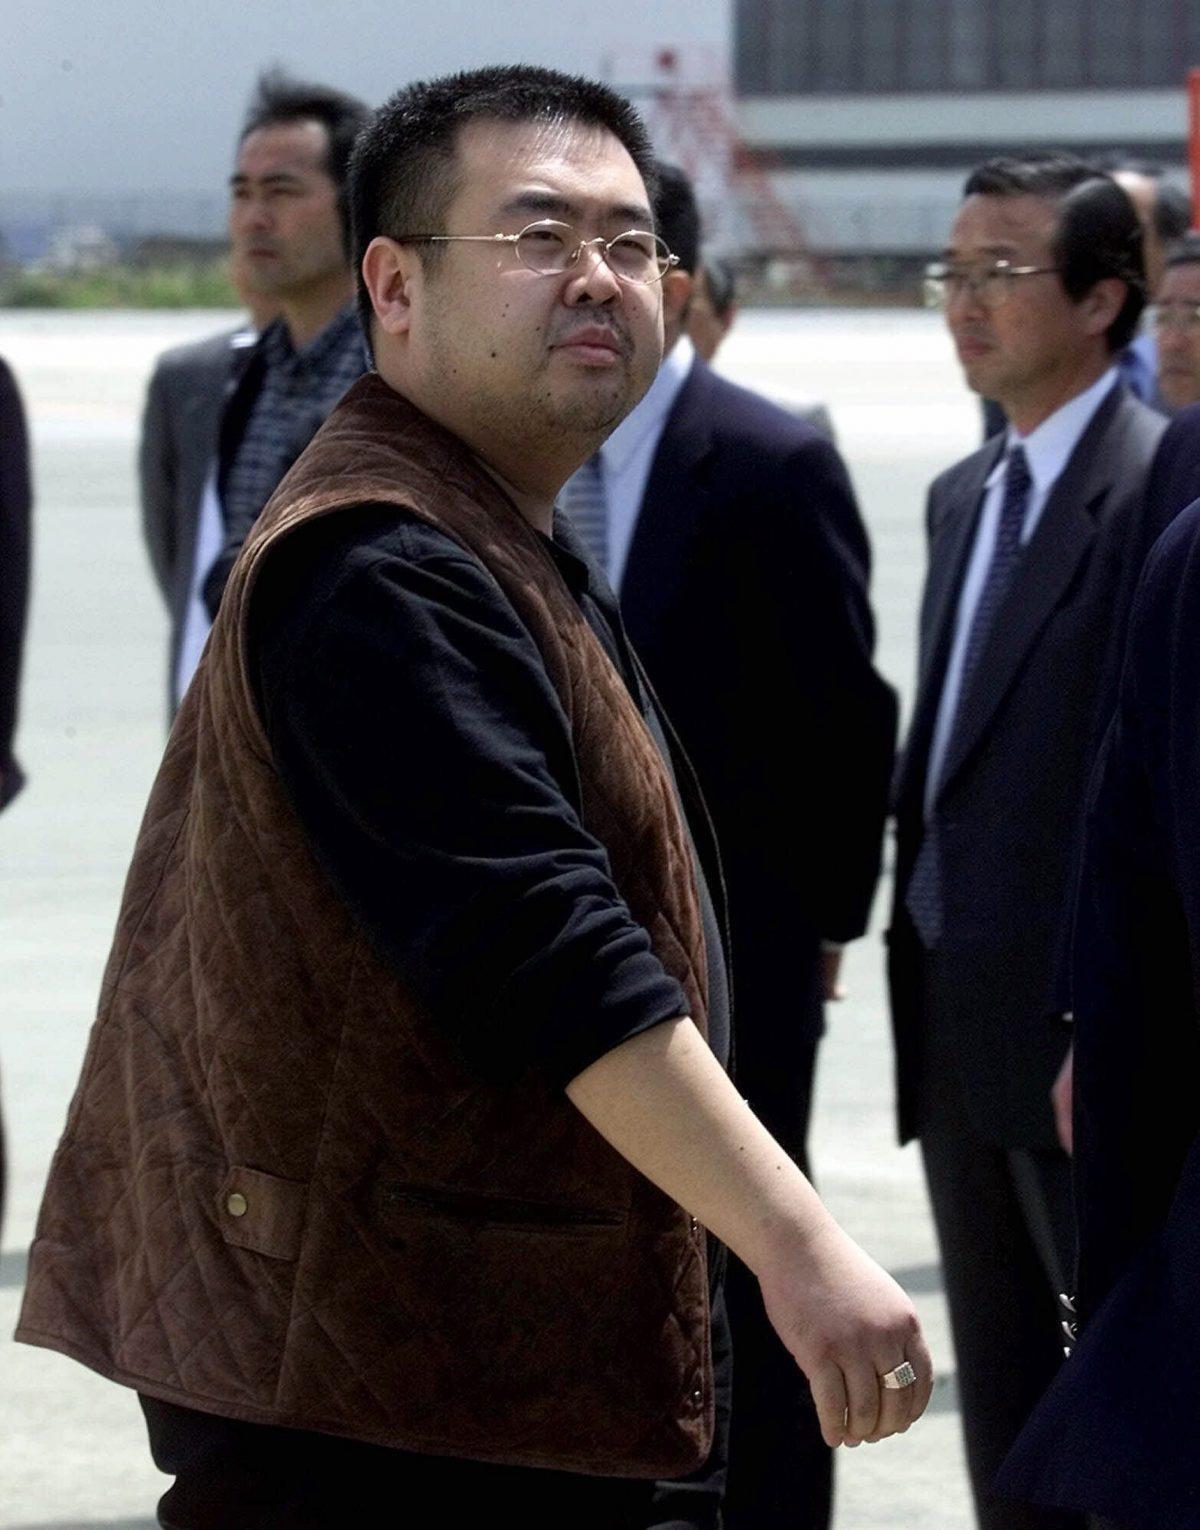 Kim Jong Nam, the eldest son of then North Korean leader Kim Jong Il and half brother to Kim Jong Un, seen before his assassination in February.  (AP Photo/Shizuo Kambayashi)